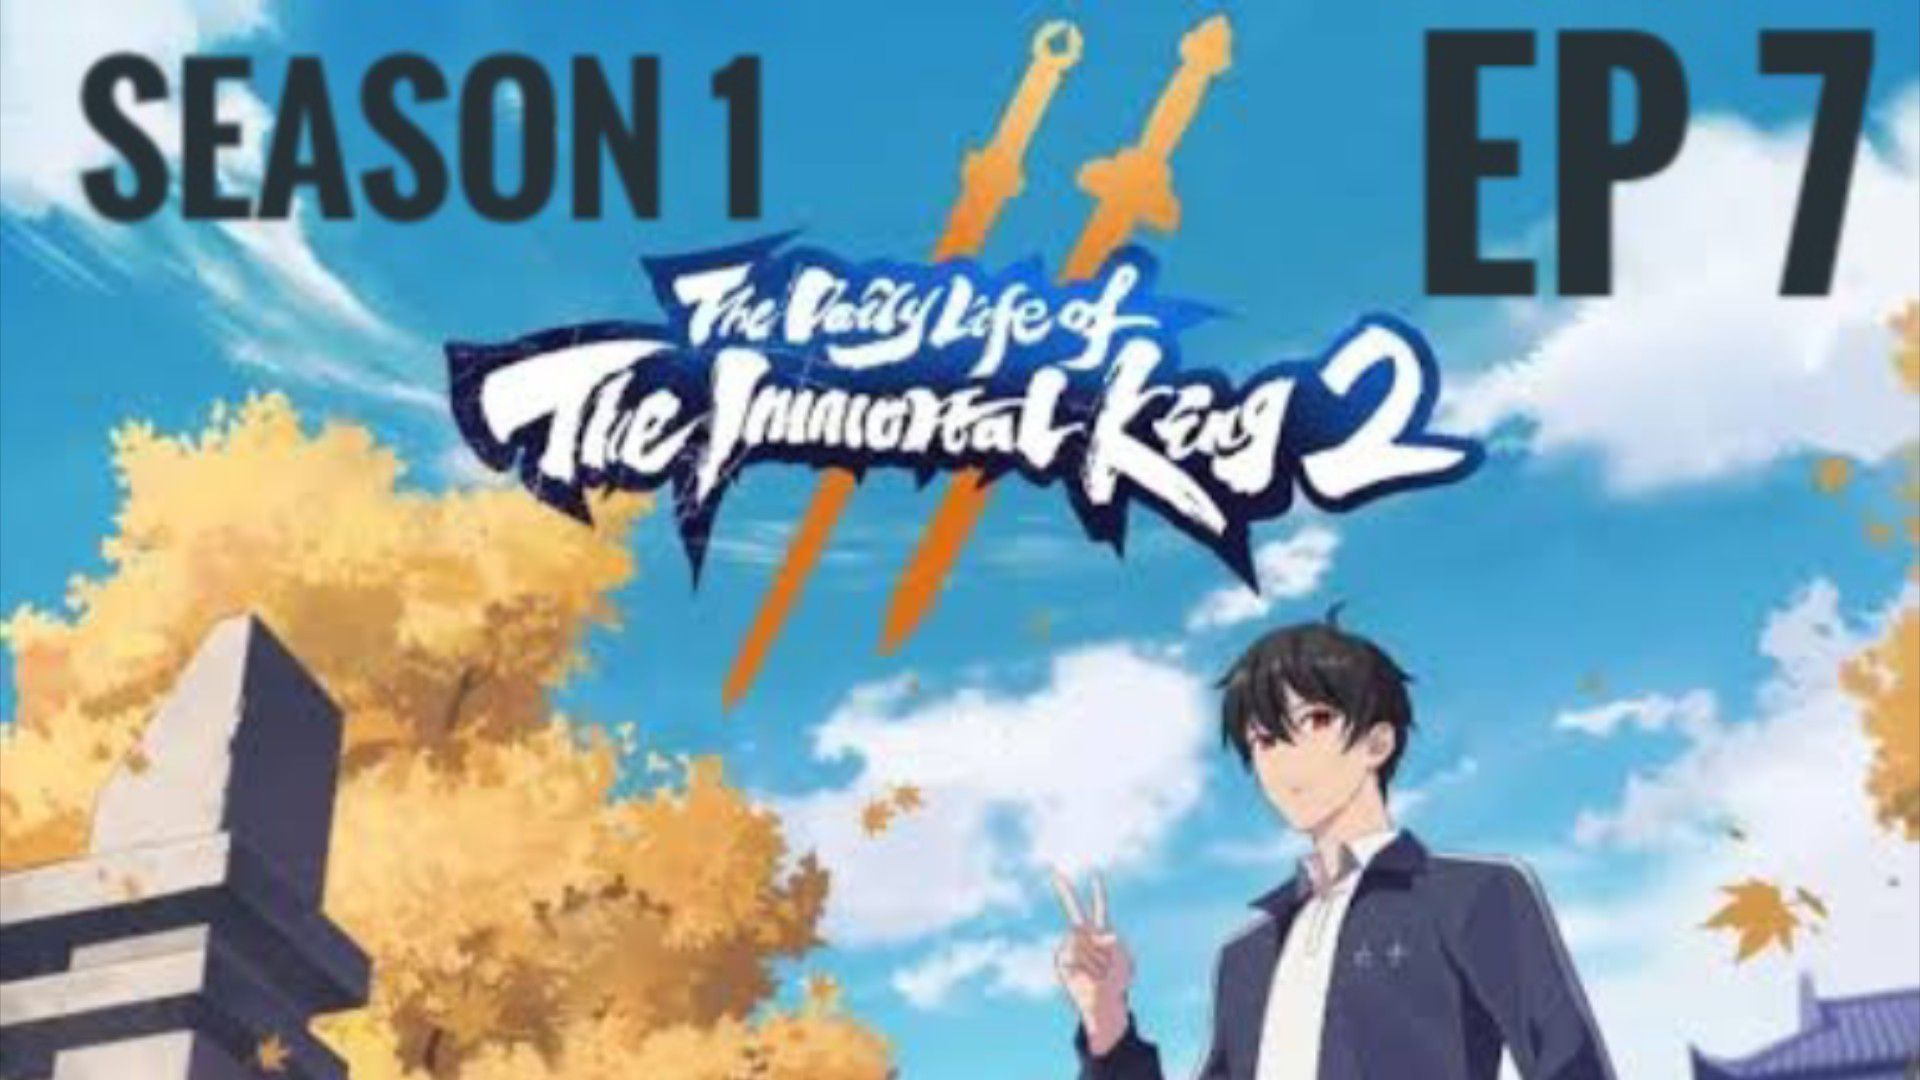 Watch The Daily Life of the Immortal King Season 1 Episode 7 - Episode 7  Online Now